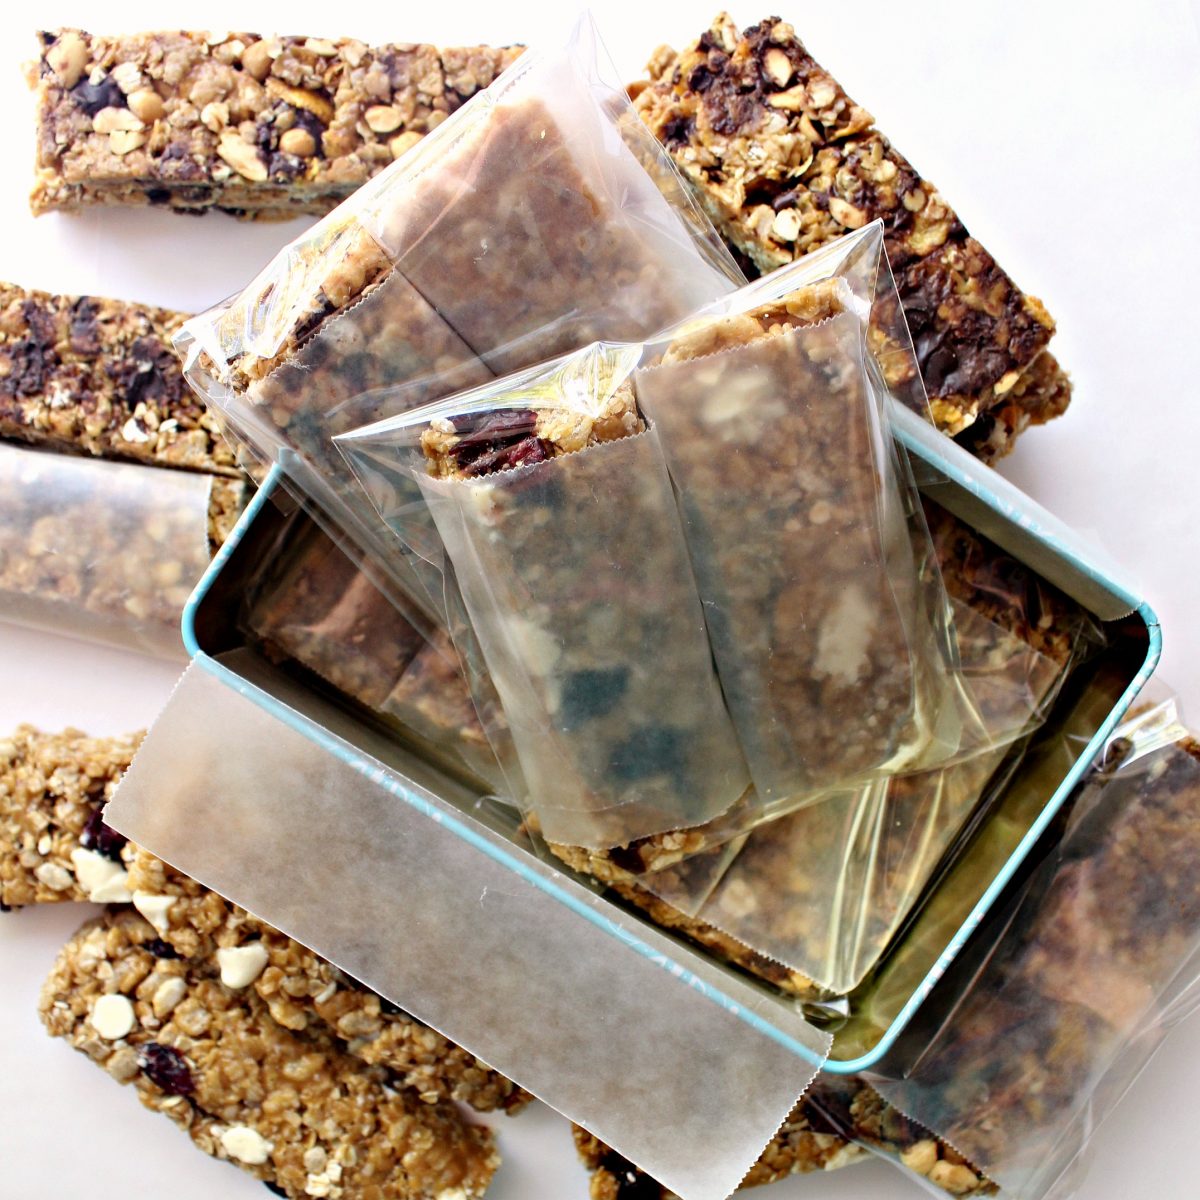 Granola bars, wrapped in wax paper then cellophane bags, packed for shipping in a cookie tin.